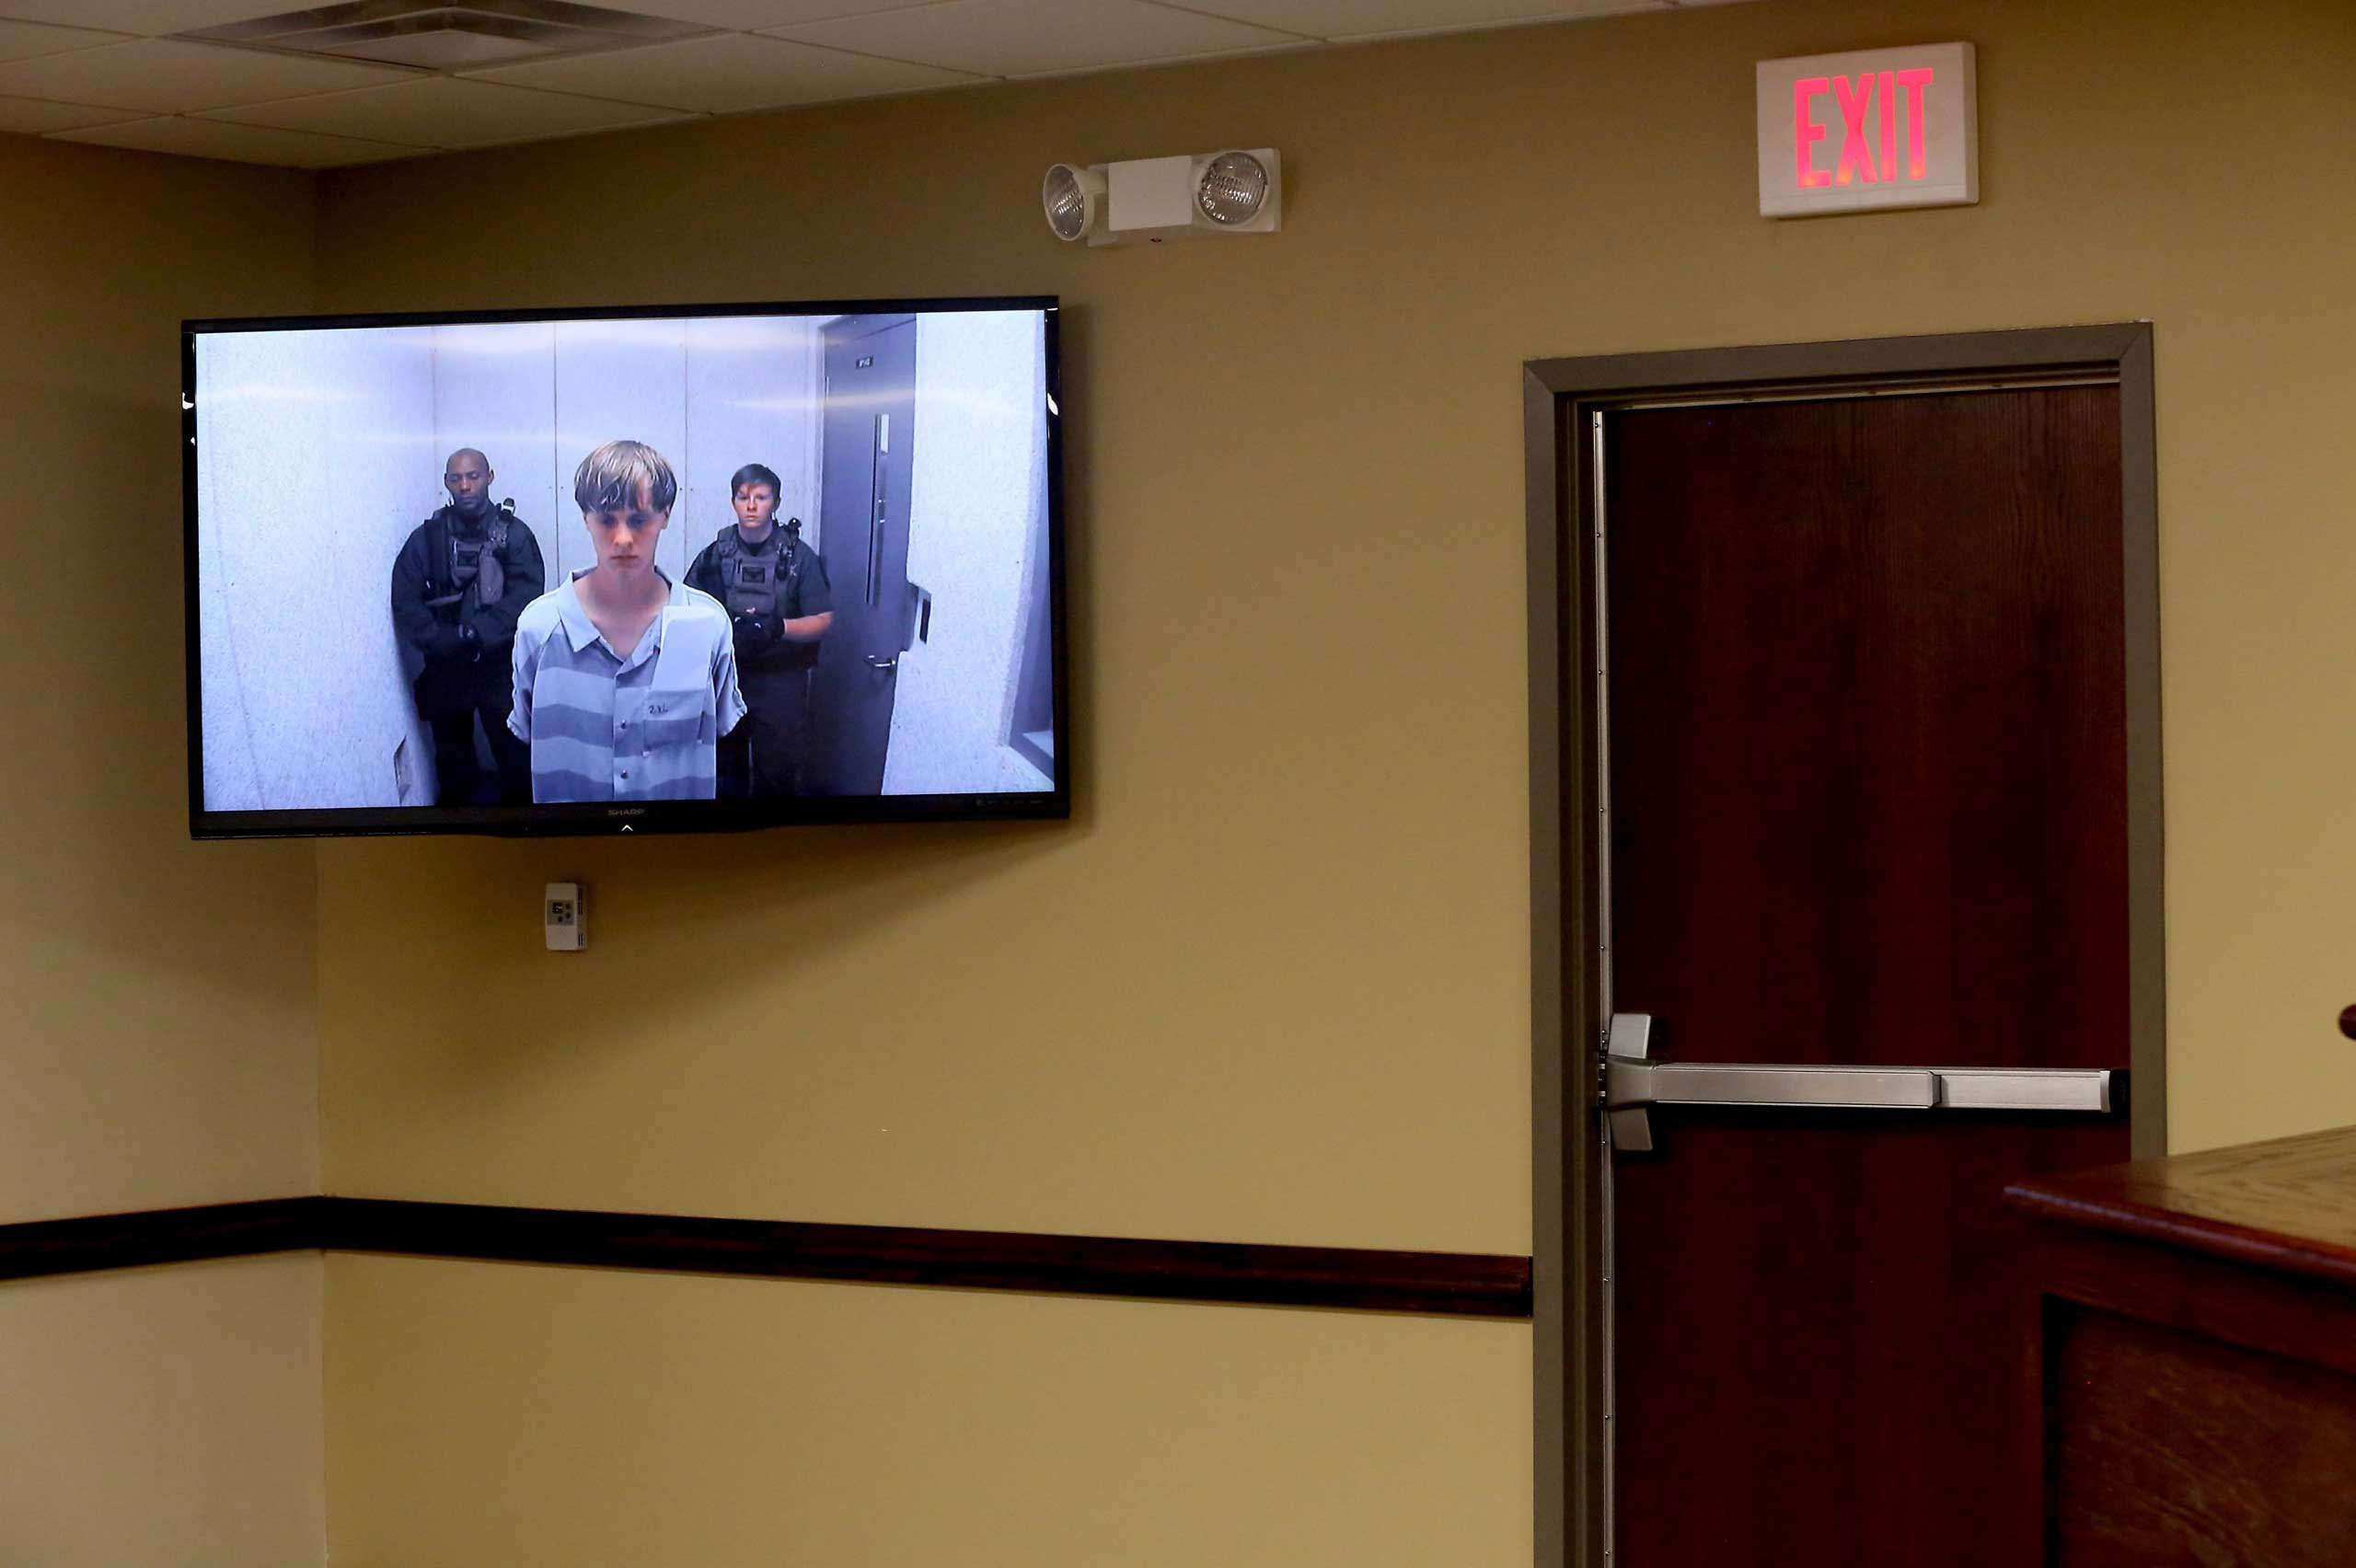 Dylann Roof appears via a jailhouse videolink at the Centralized Bond Hearing Court in North Charleston, S.C. June 19, 2015. Roof was charged with nine counts of murder and firearms charges in the shooting at Emanuel African Methodist Episcopal Church in downtown Charleston, S.C.